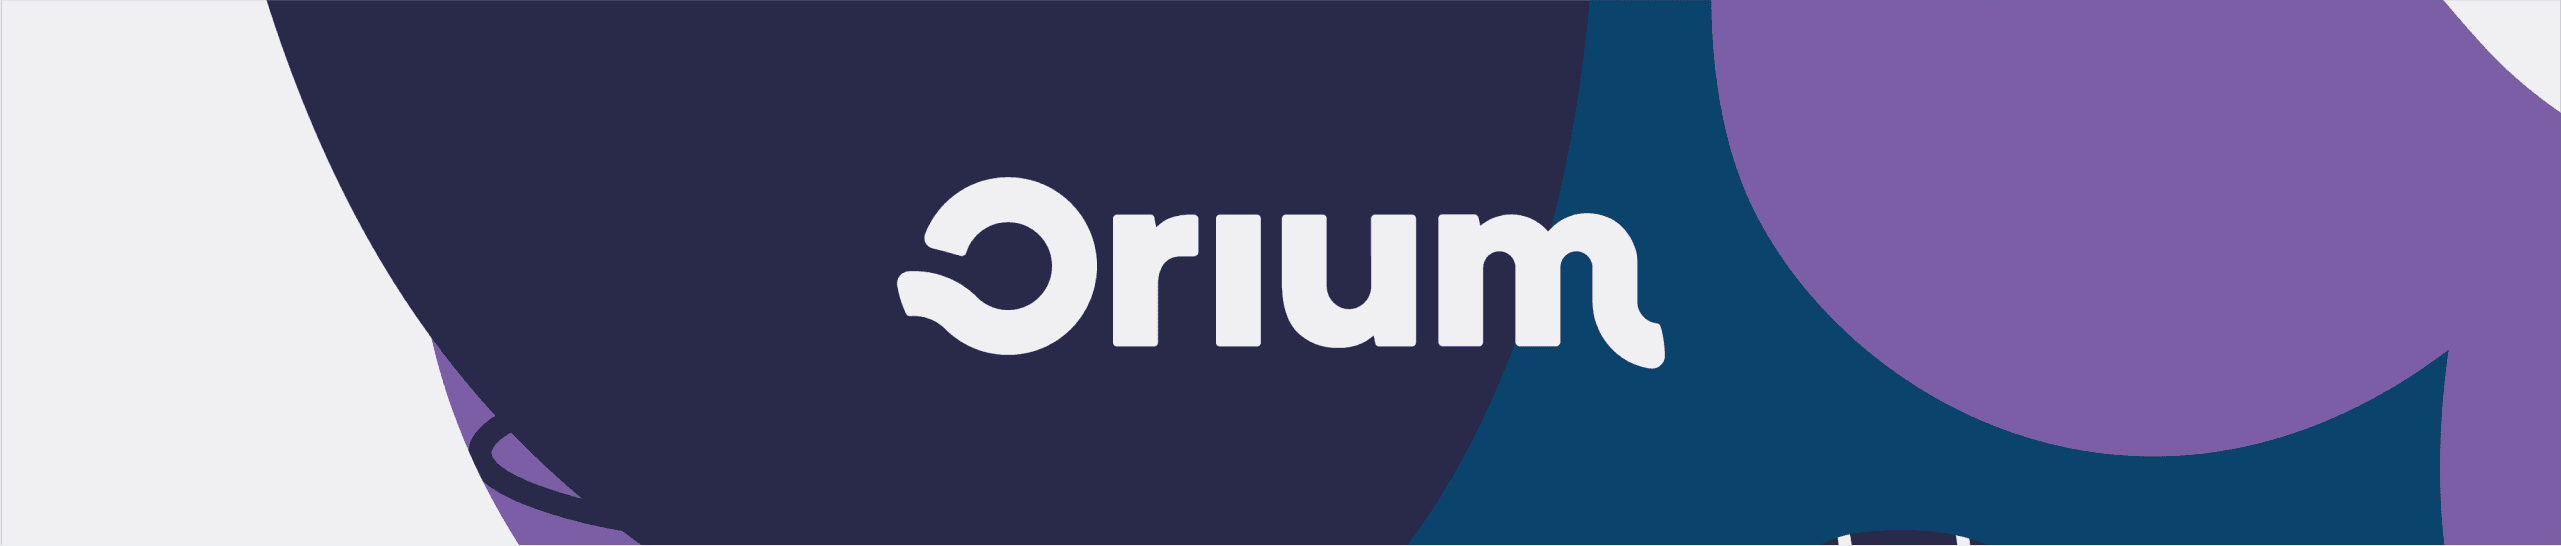 Orium logo on a blue, purple, and grey background.